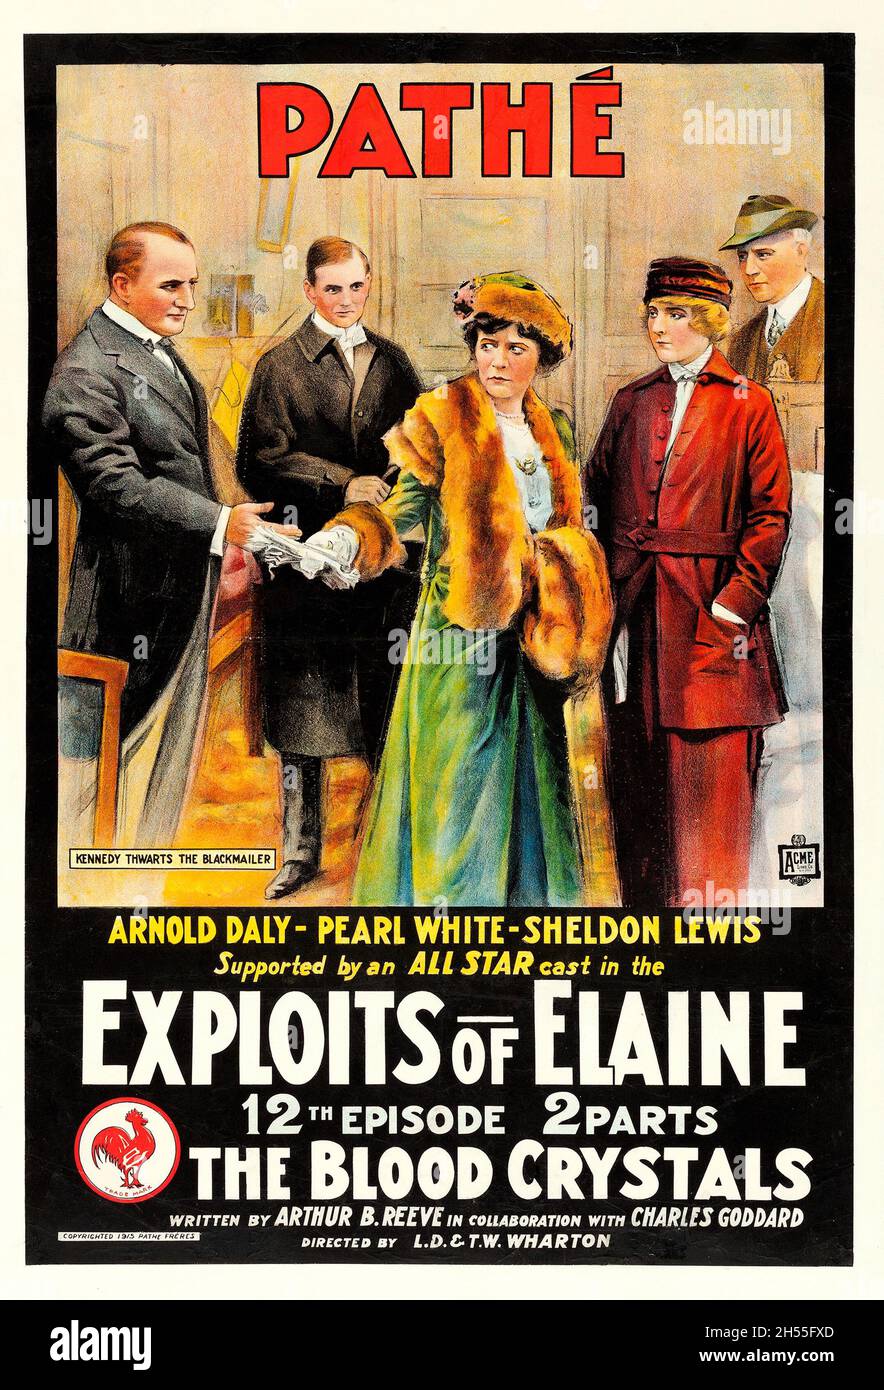 The Exploits of Elaine (Pathé, 1915). Episode 12 -- 'The Blood Crystals.' - Antique / old movie / film poster. Stock Photo